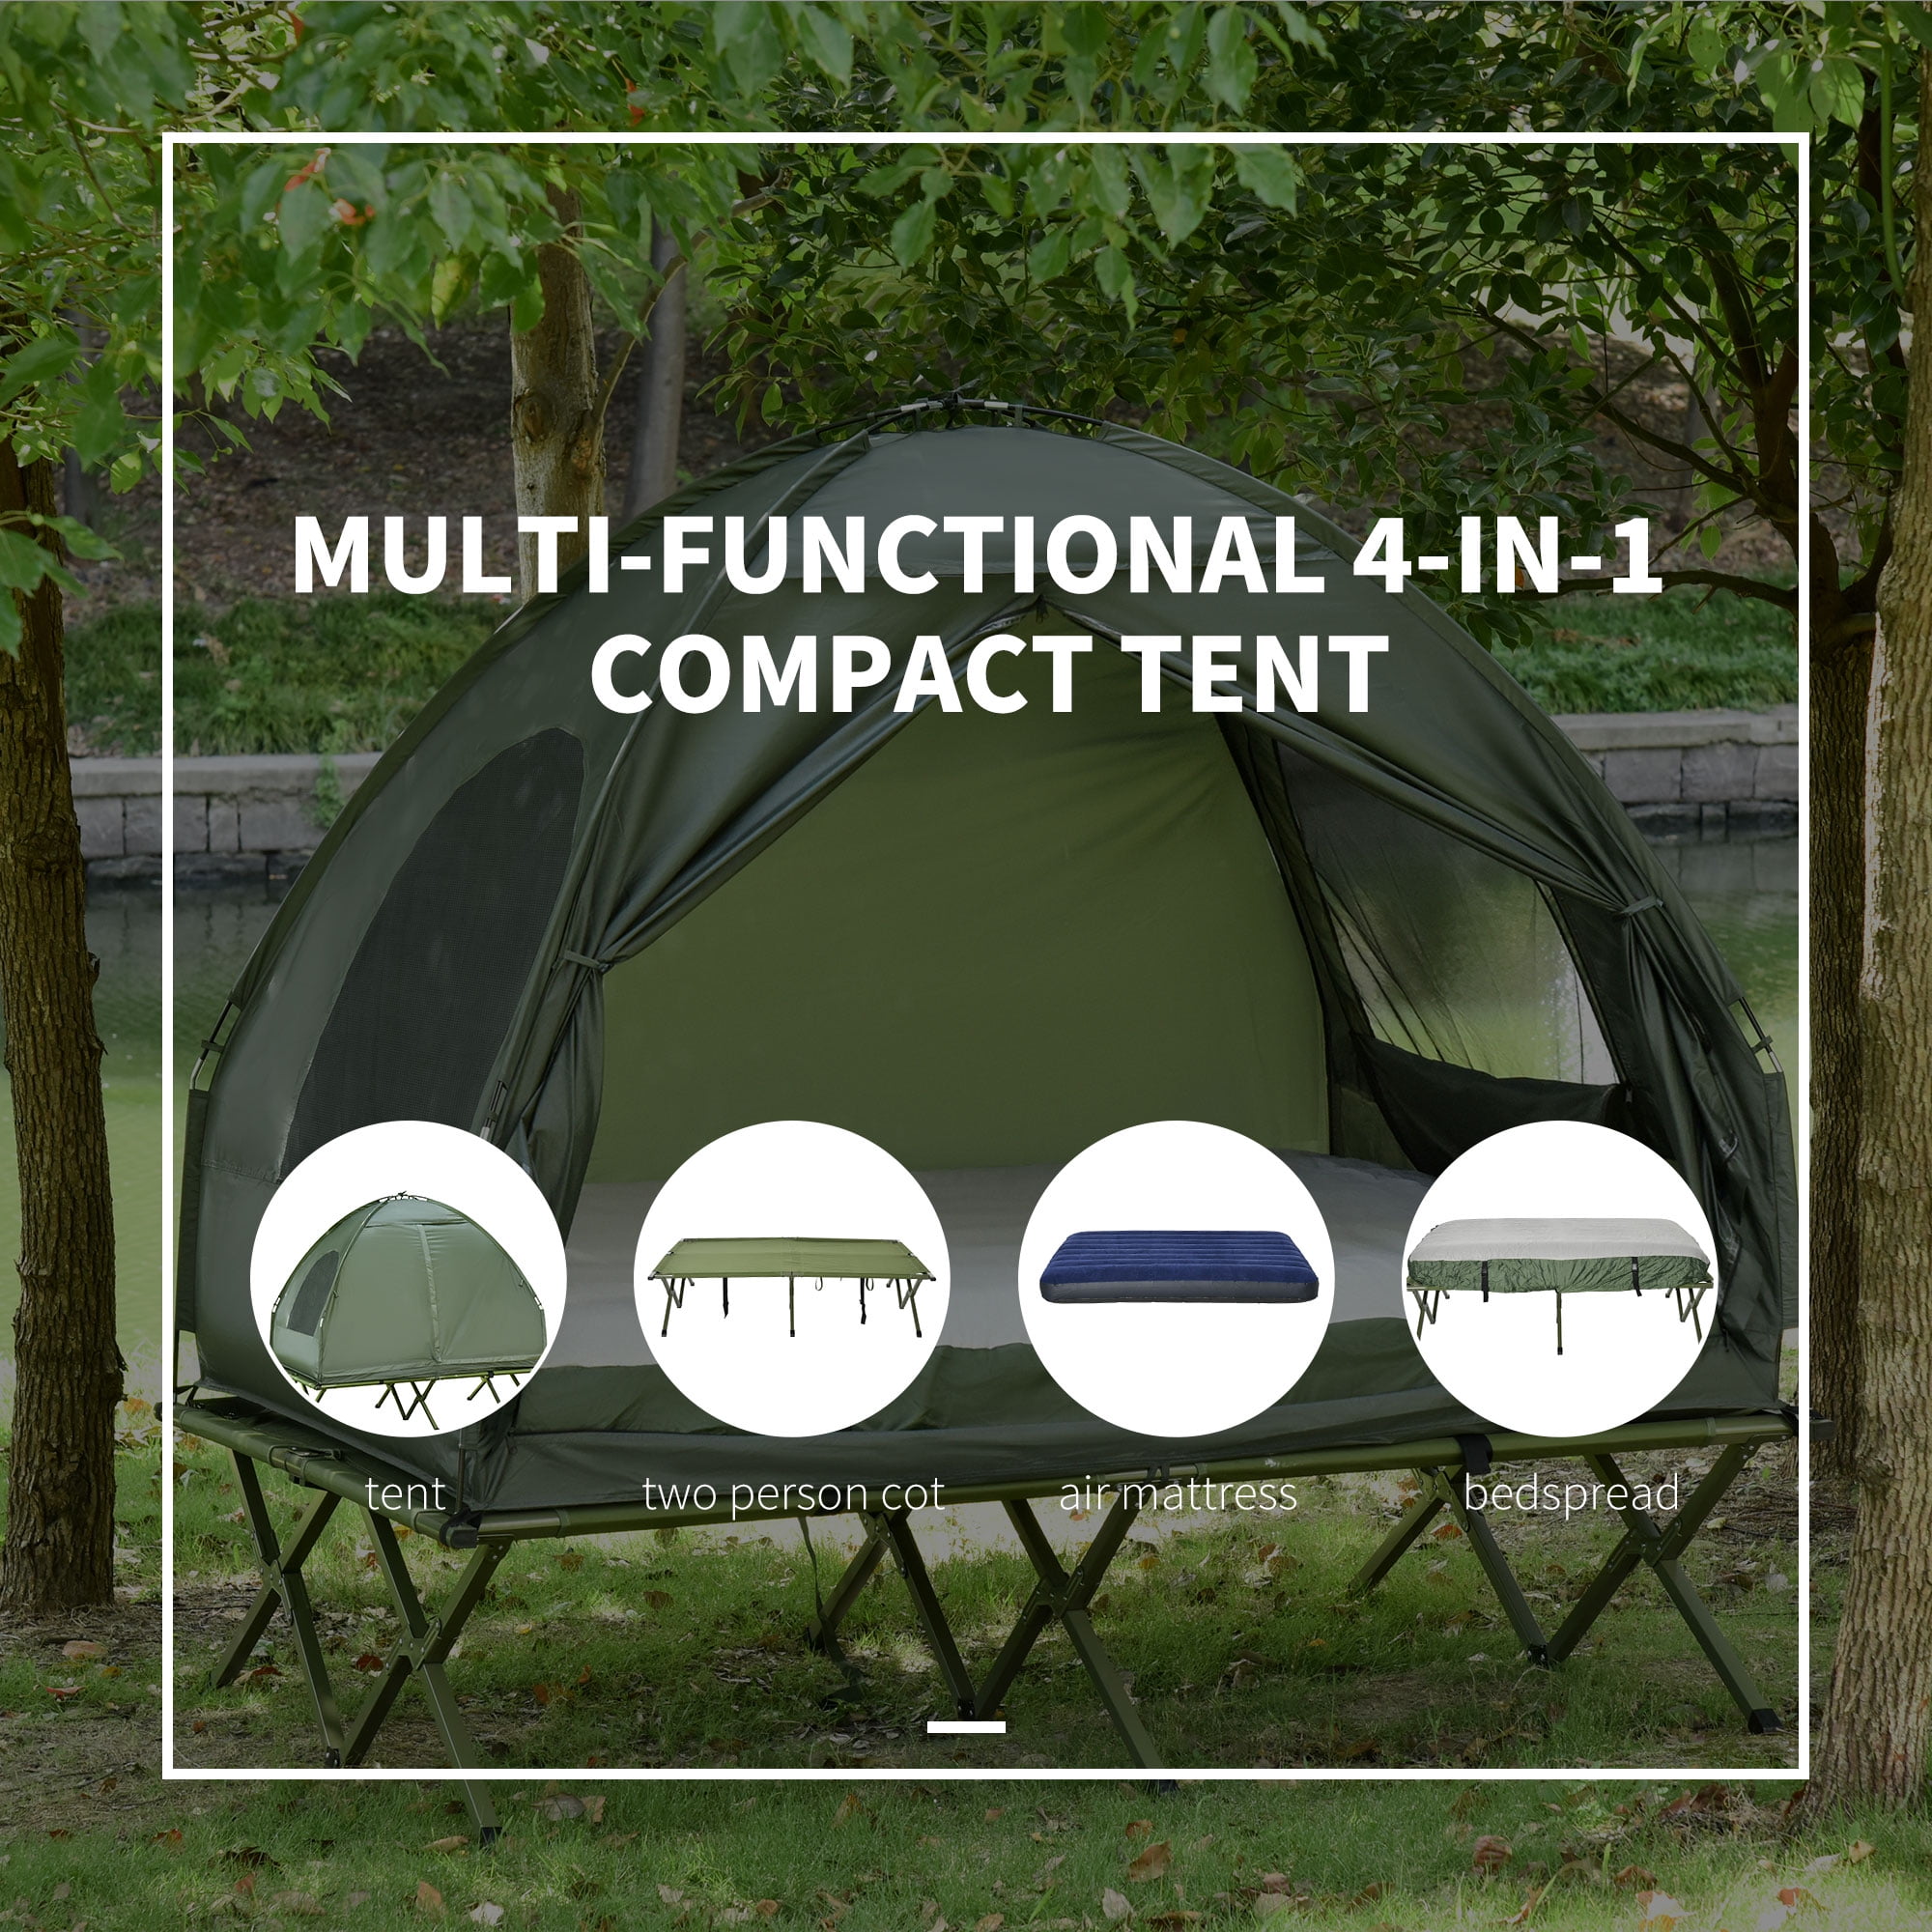 Outsunny 2-Person Camping Cot with Tent, Air Mattress, and Bedspread |  Foldable Camping Bed Combo for Outdoor Hiking, Picnic, Travel